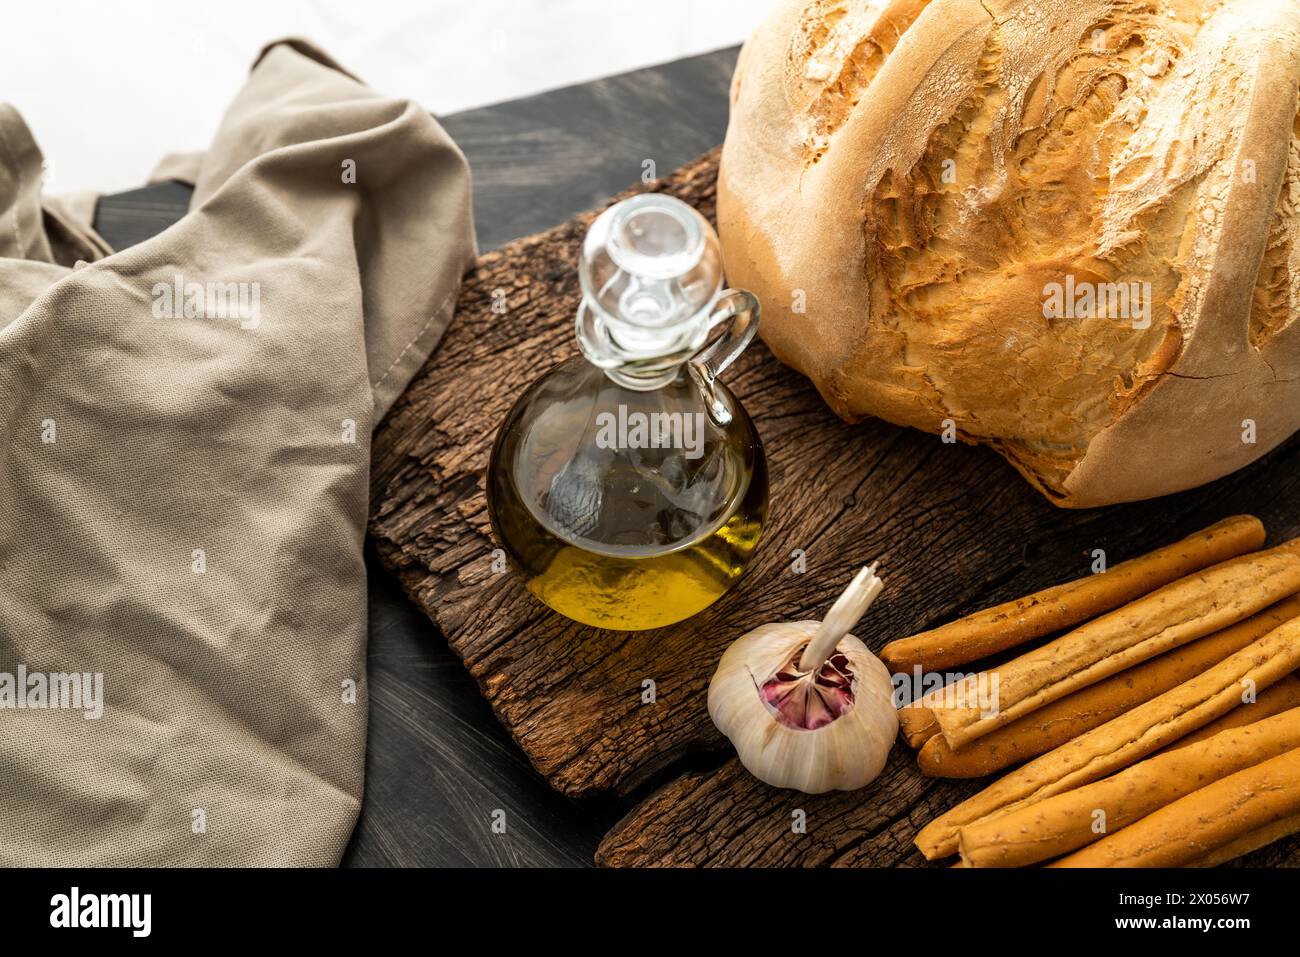 breadsticks and country bread, with olive oil, garlic and flavored mayonnaise Stock Photo